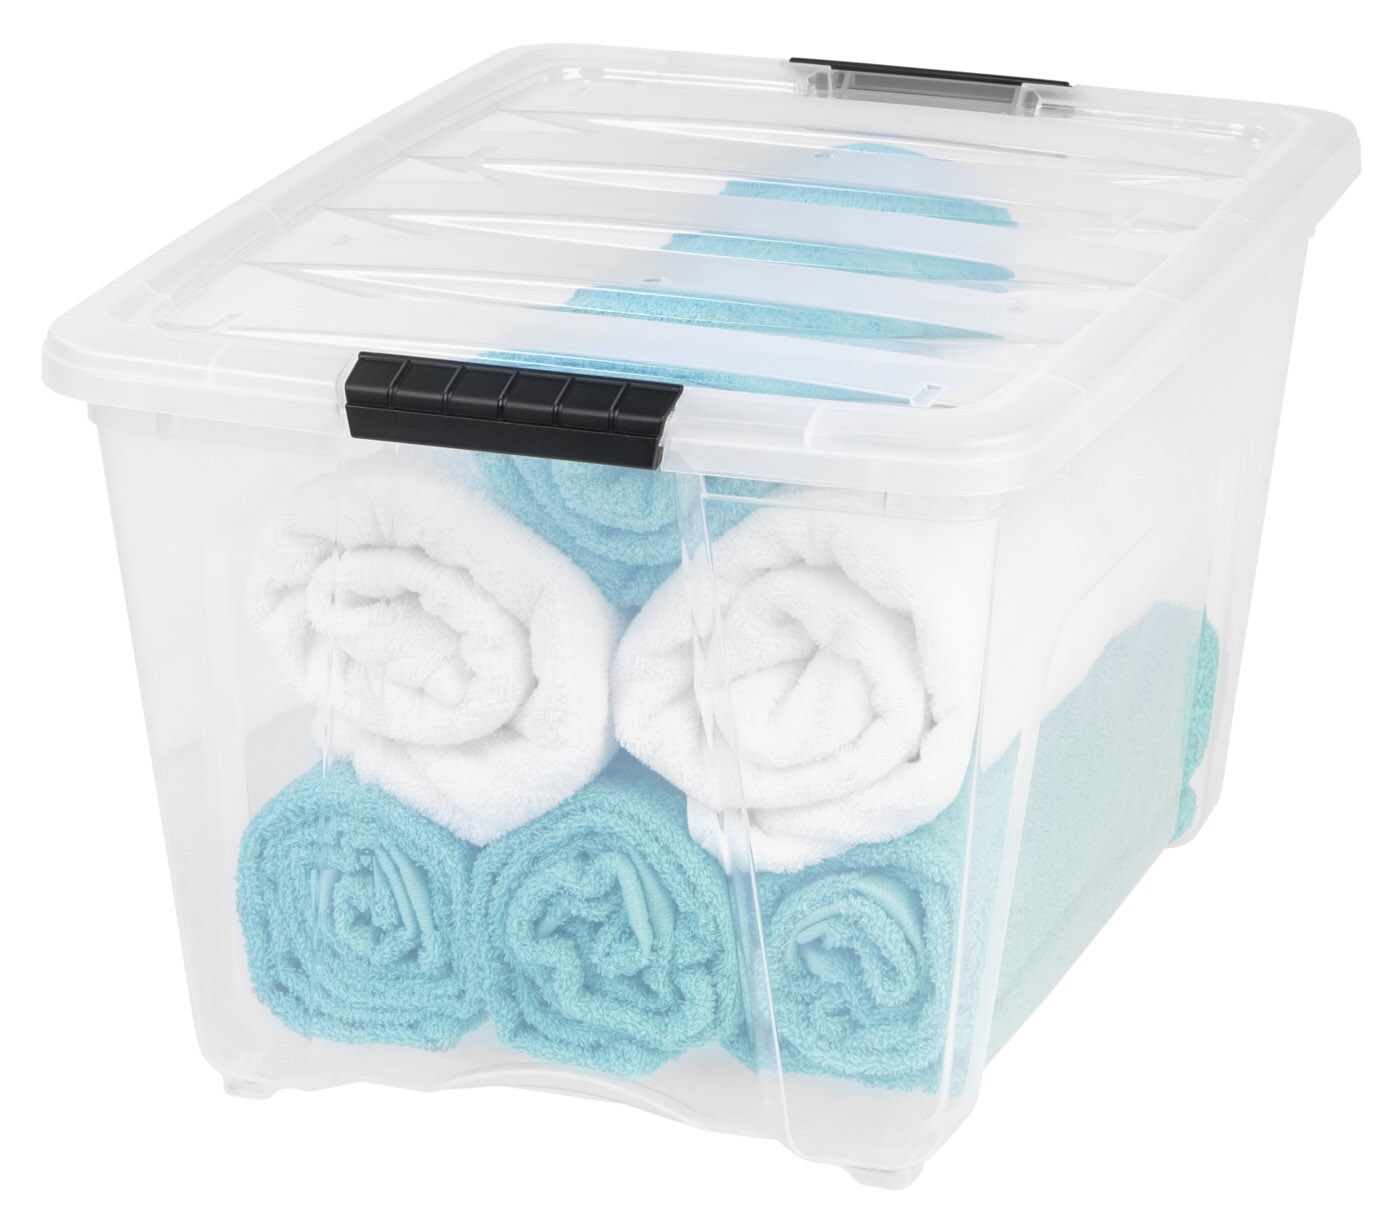 IRIS USA 53qt Plastic Storage Bin with Lid and Secure Latching Buckles, Clear